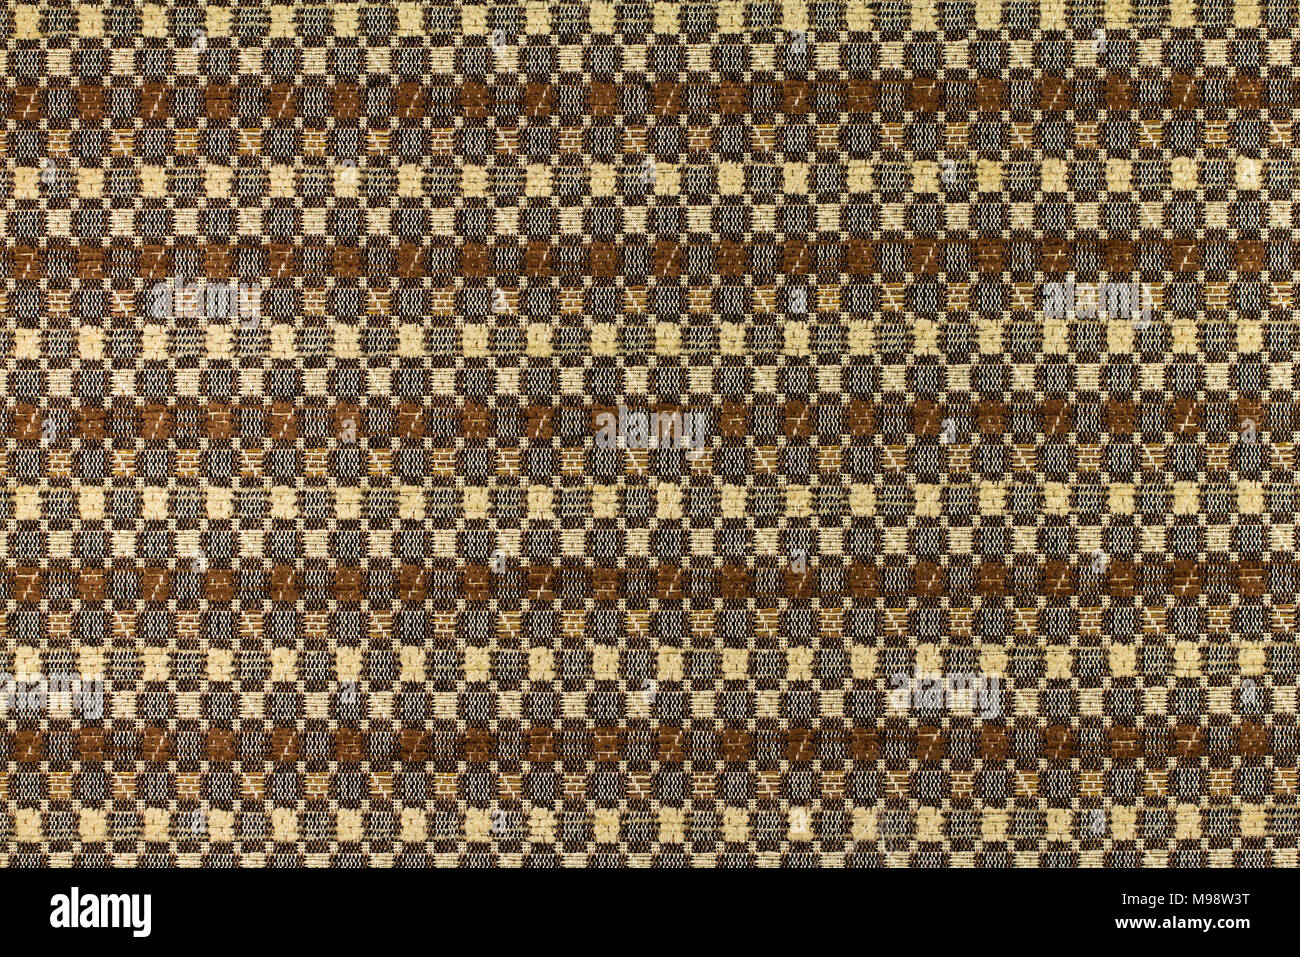 Light brown background with an abstract pattern. Close-up. Stock Photo